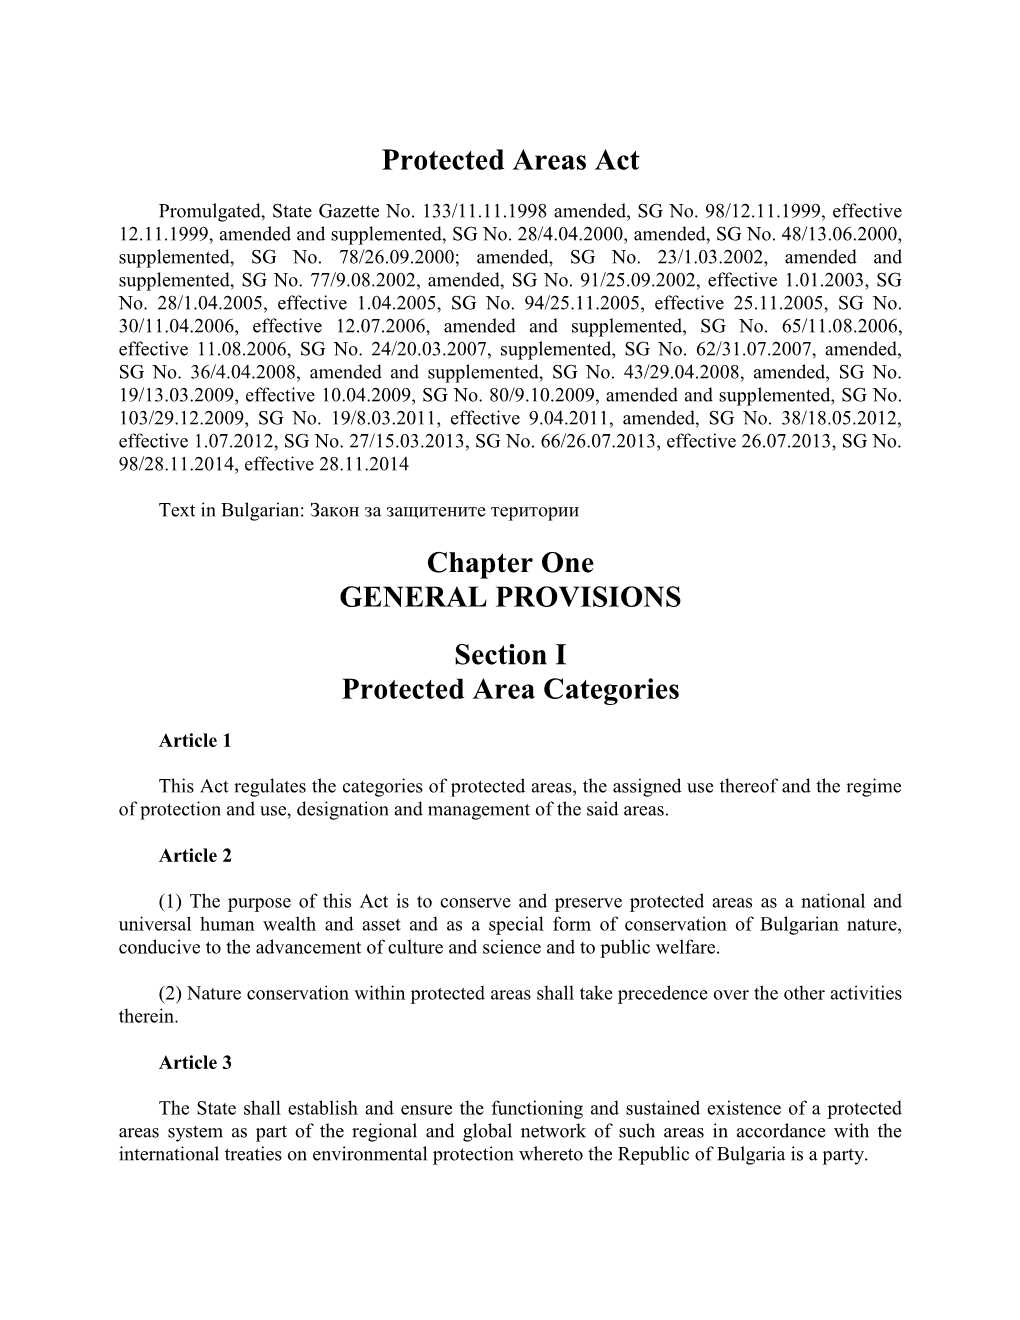 Protected Areas Act Chapter One GENERAL PROVISIONS Section I